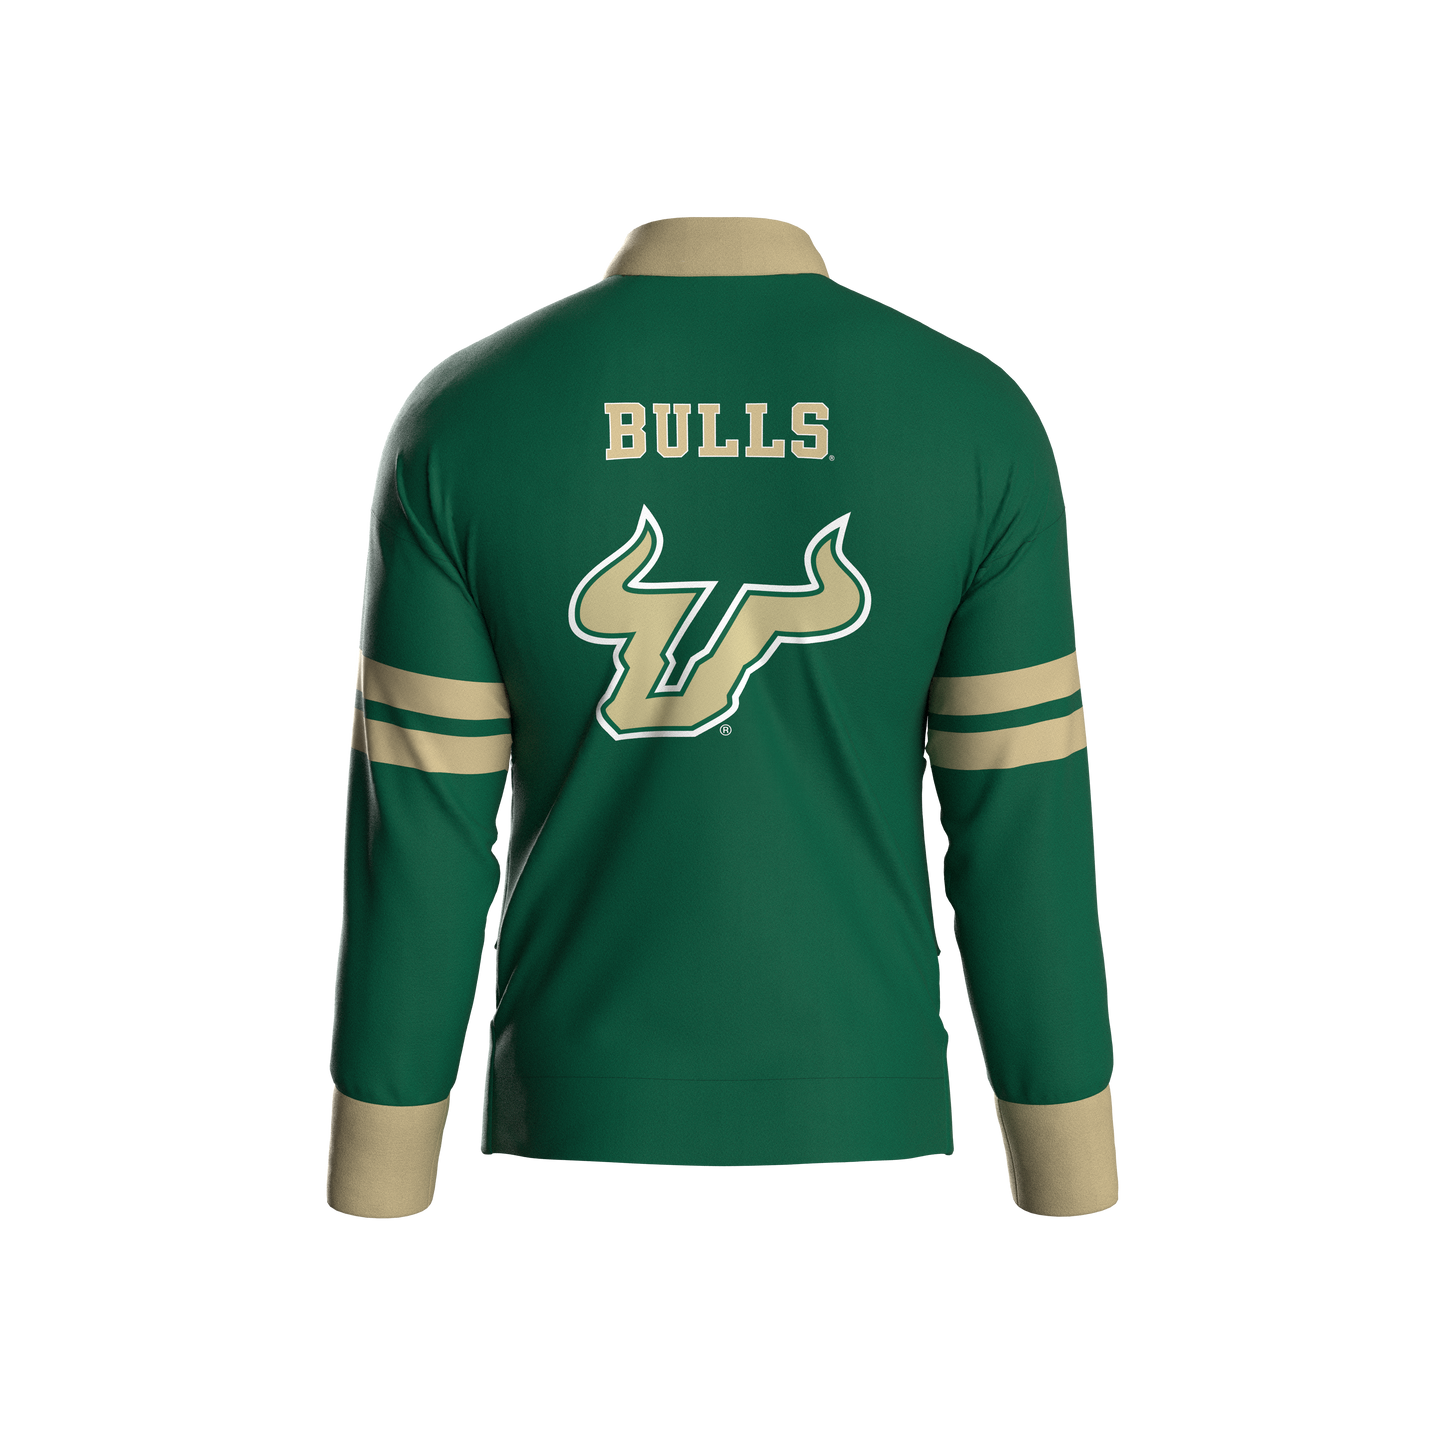 University of South Florida Home Zip-Up (youth)